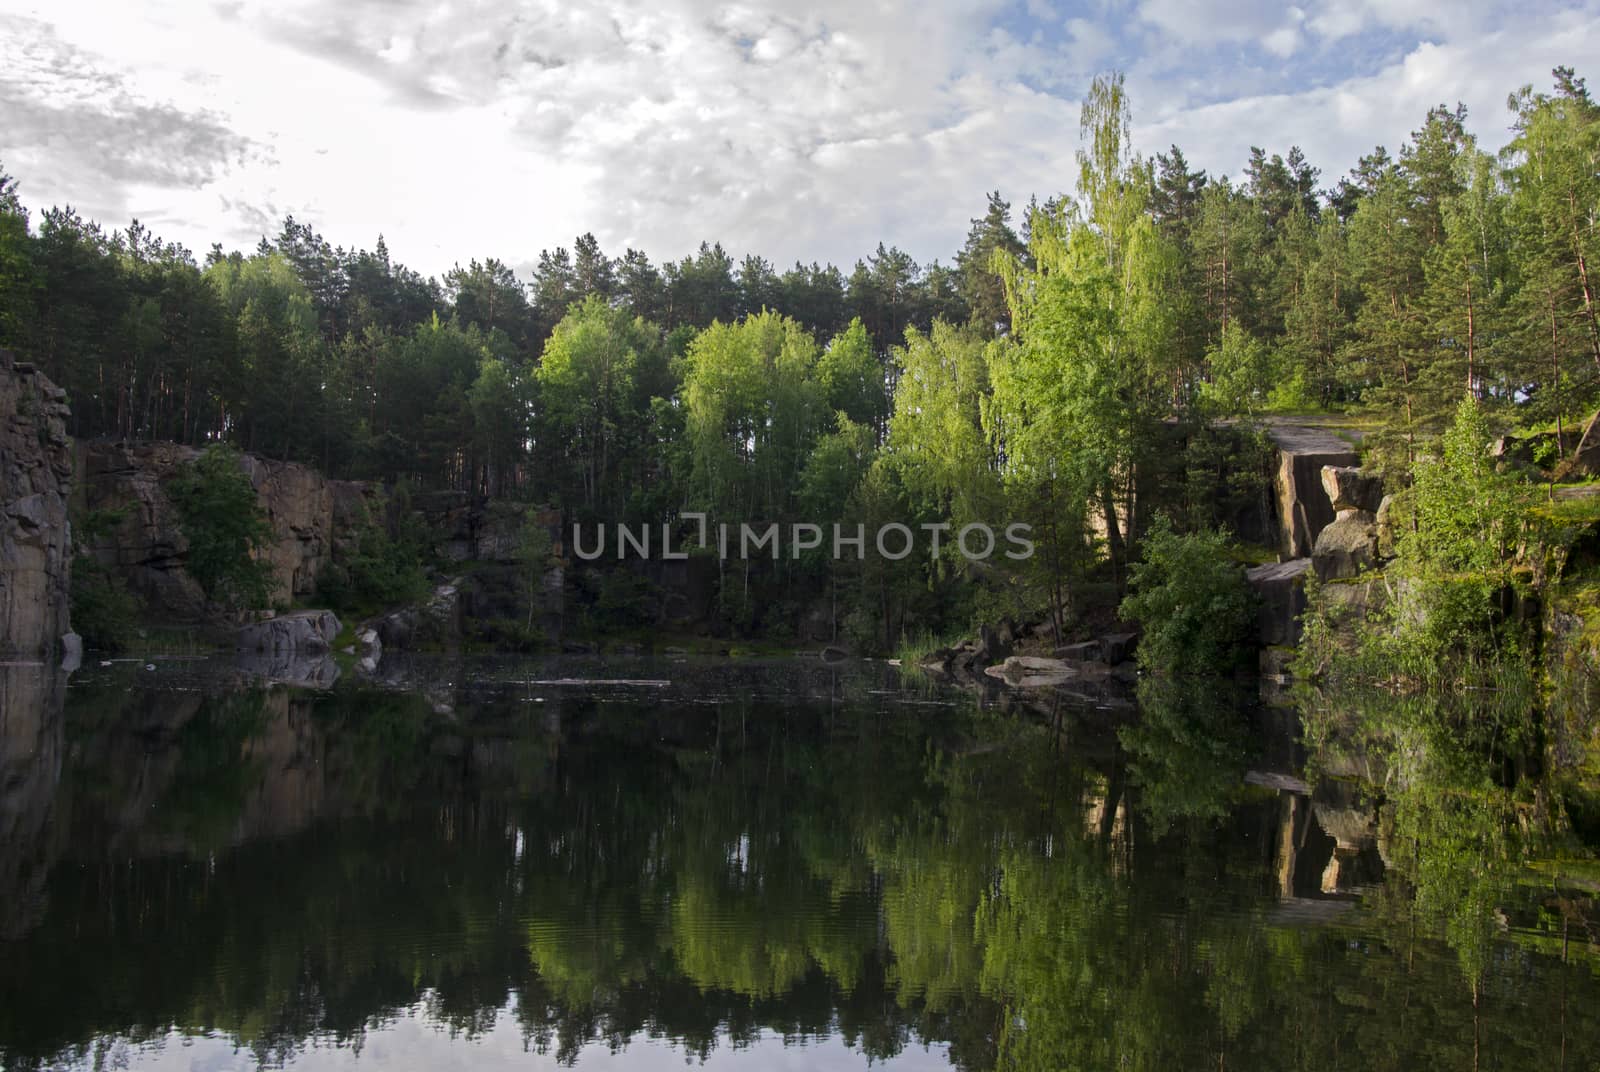 Lake in the stone canyon surrounded by forest by Irene1601